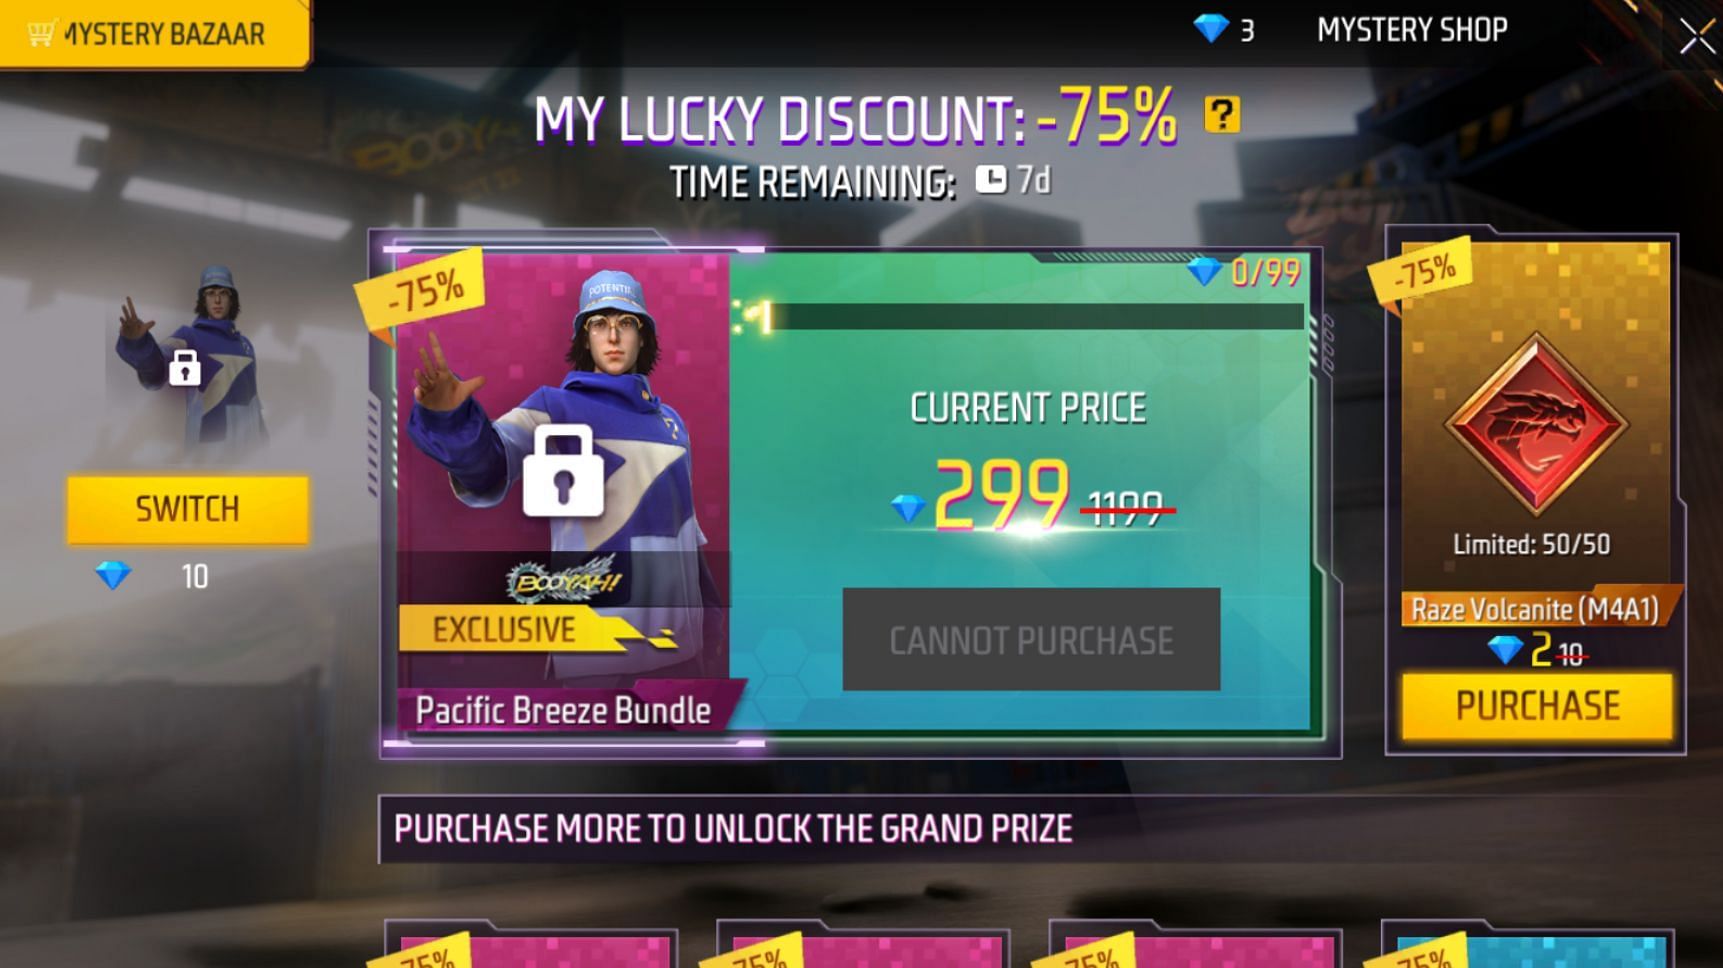 Mystery Shop offers items at huge discounts (Image via Garena)